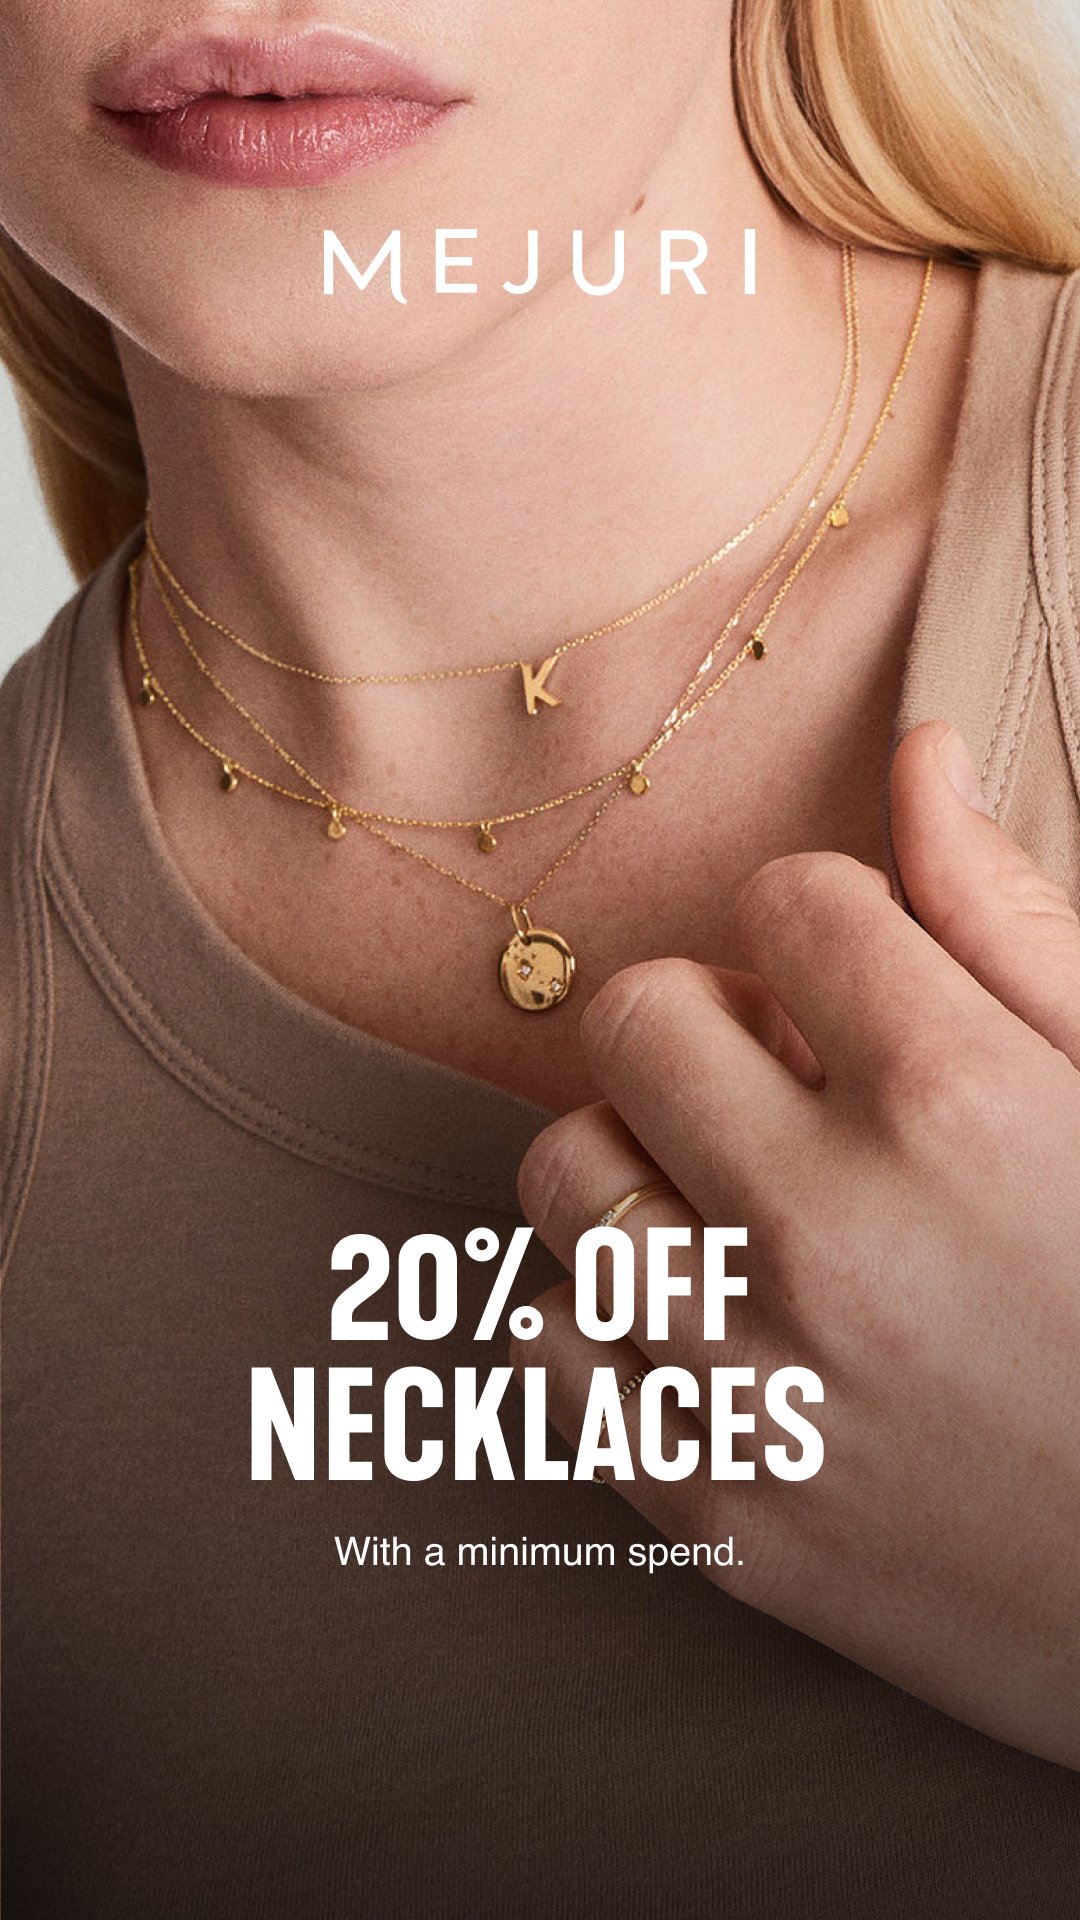 1_Story_20%OffNecklaces.jpg